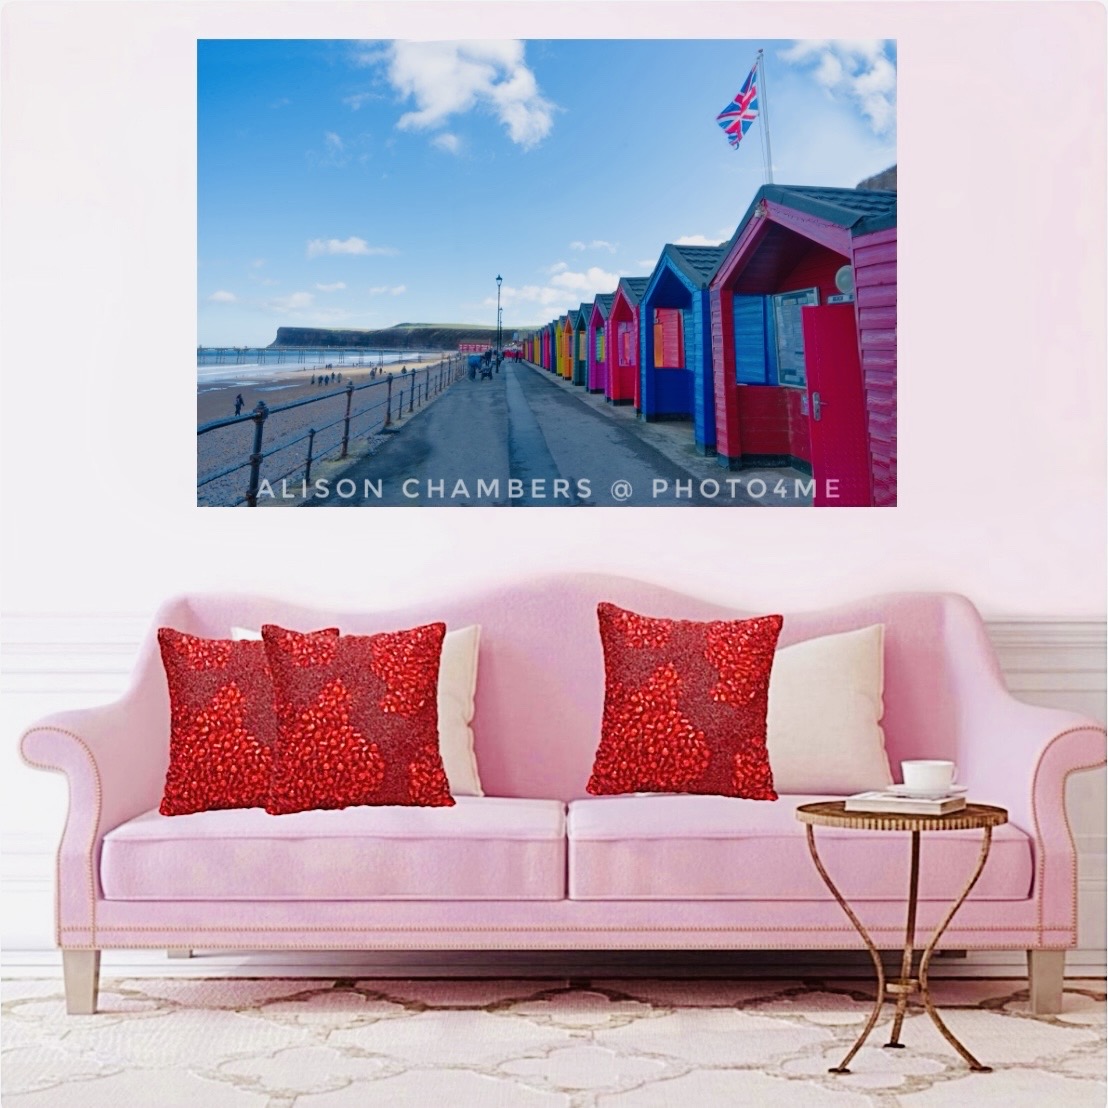 15% off Saltburn-by-the-Sea Seafront©️. Available from; shop.photo4me.com/1310814 & alisonchambers2.redbubble.com & 2-alison-chambers.pixels.com #saltburnbythesea #saltburn #saltburnbeach #saltburnpier #saltburnbeachhuts #beachhuts #redcarandcleveland #clevelandway